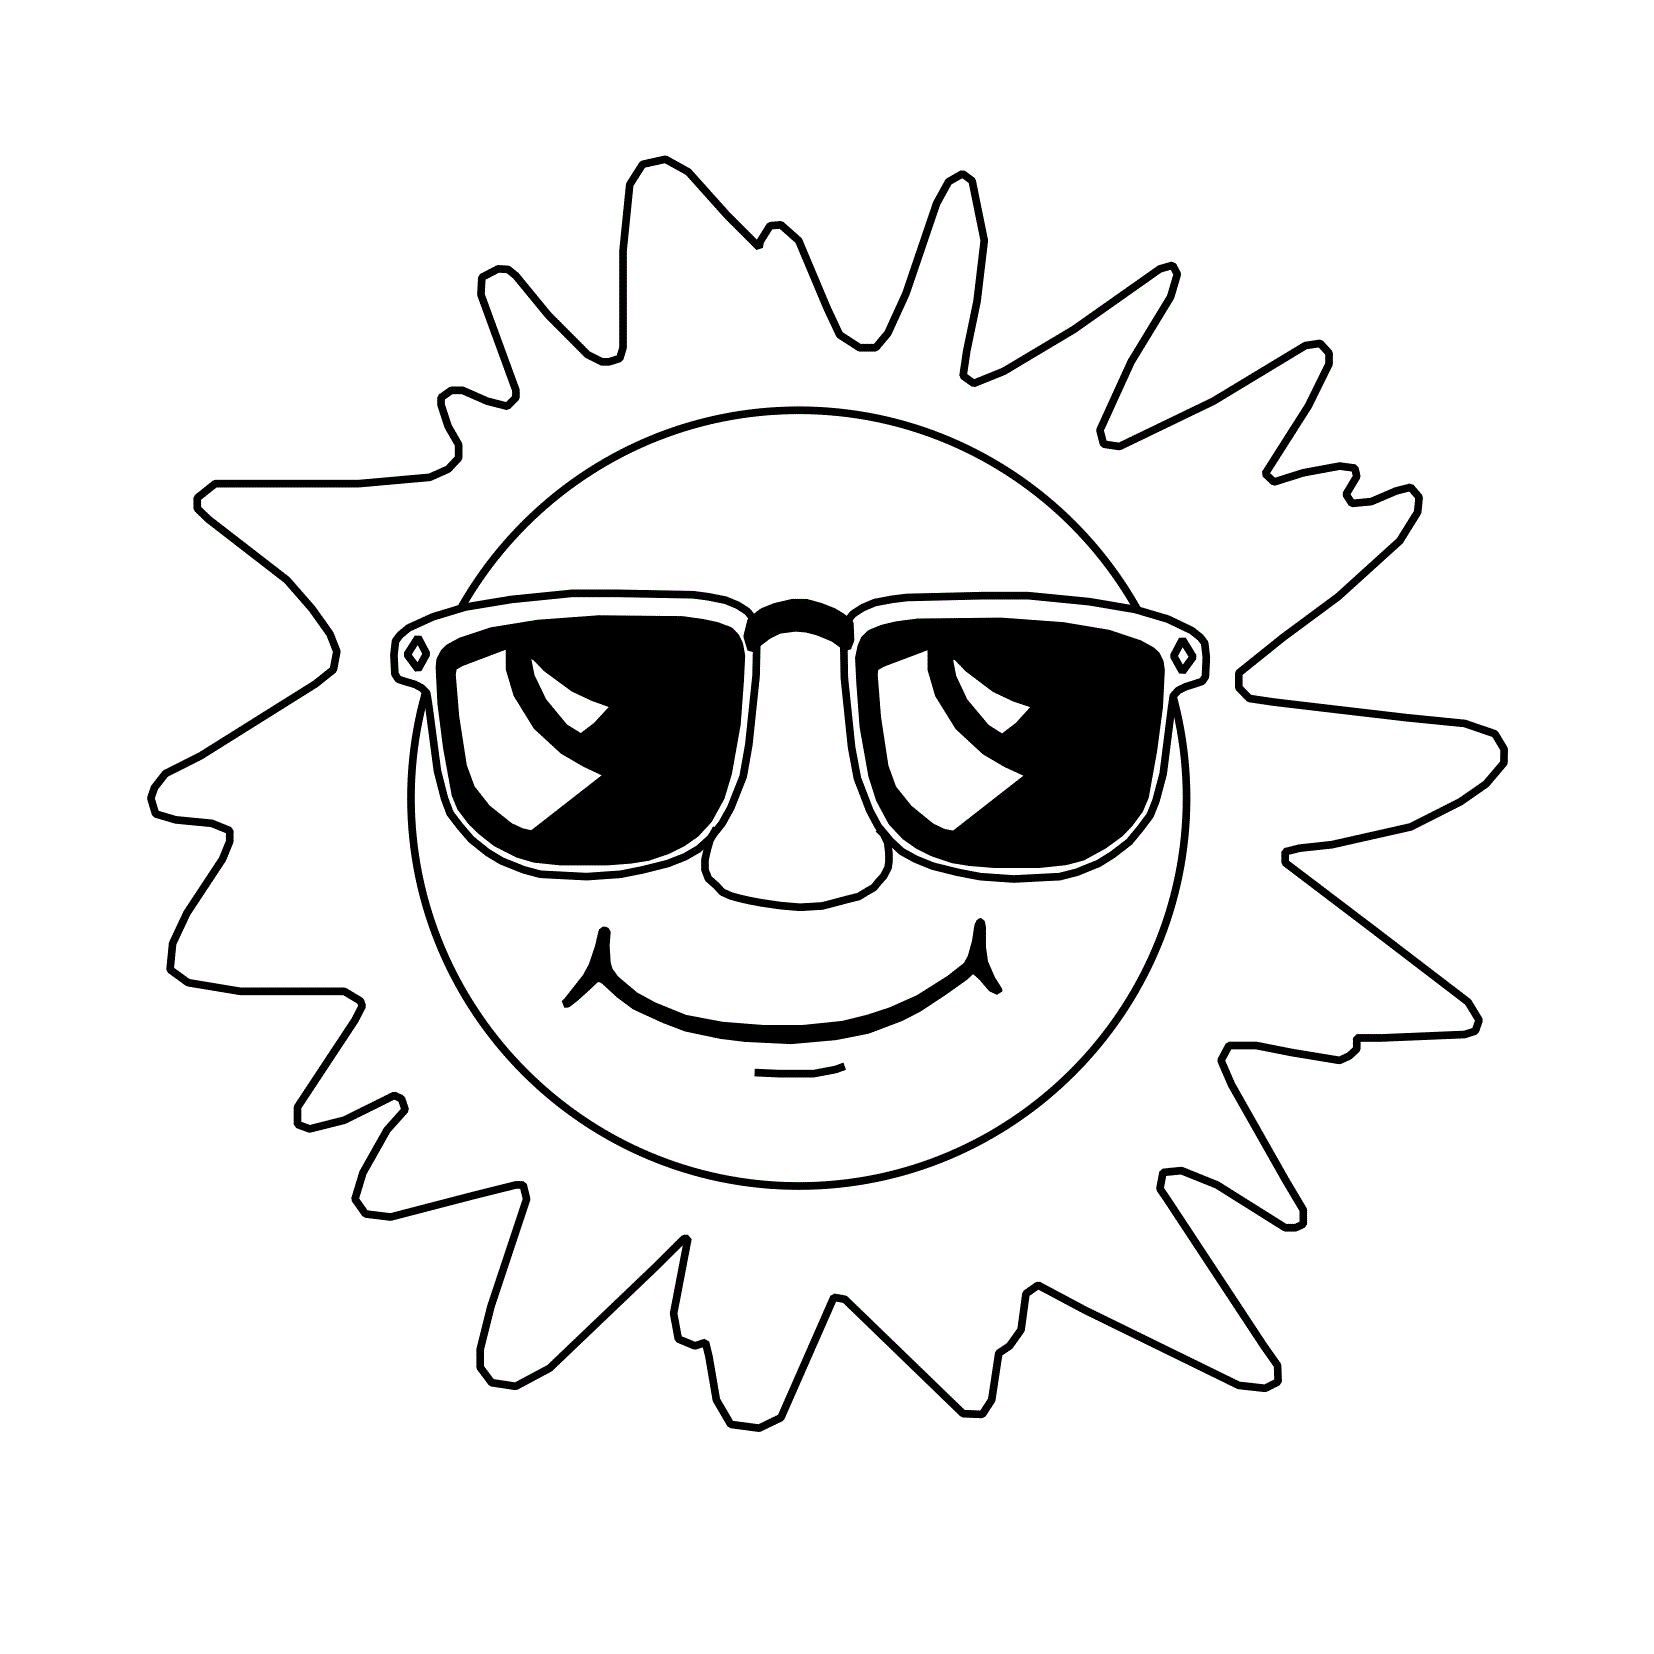 free-coloring-page-of-a-sun-download-free-coloring-page-of-a-sun-png